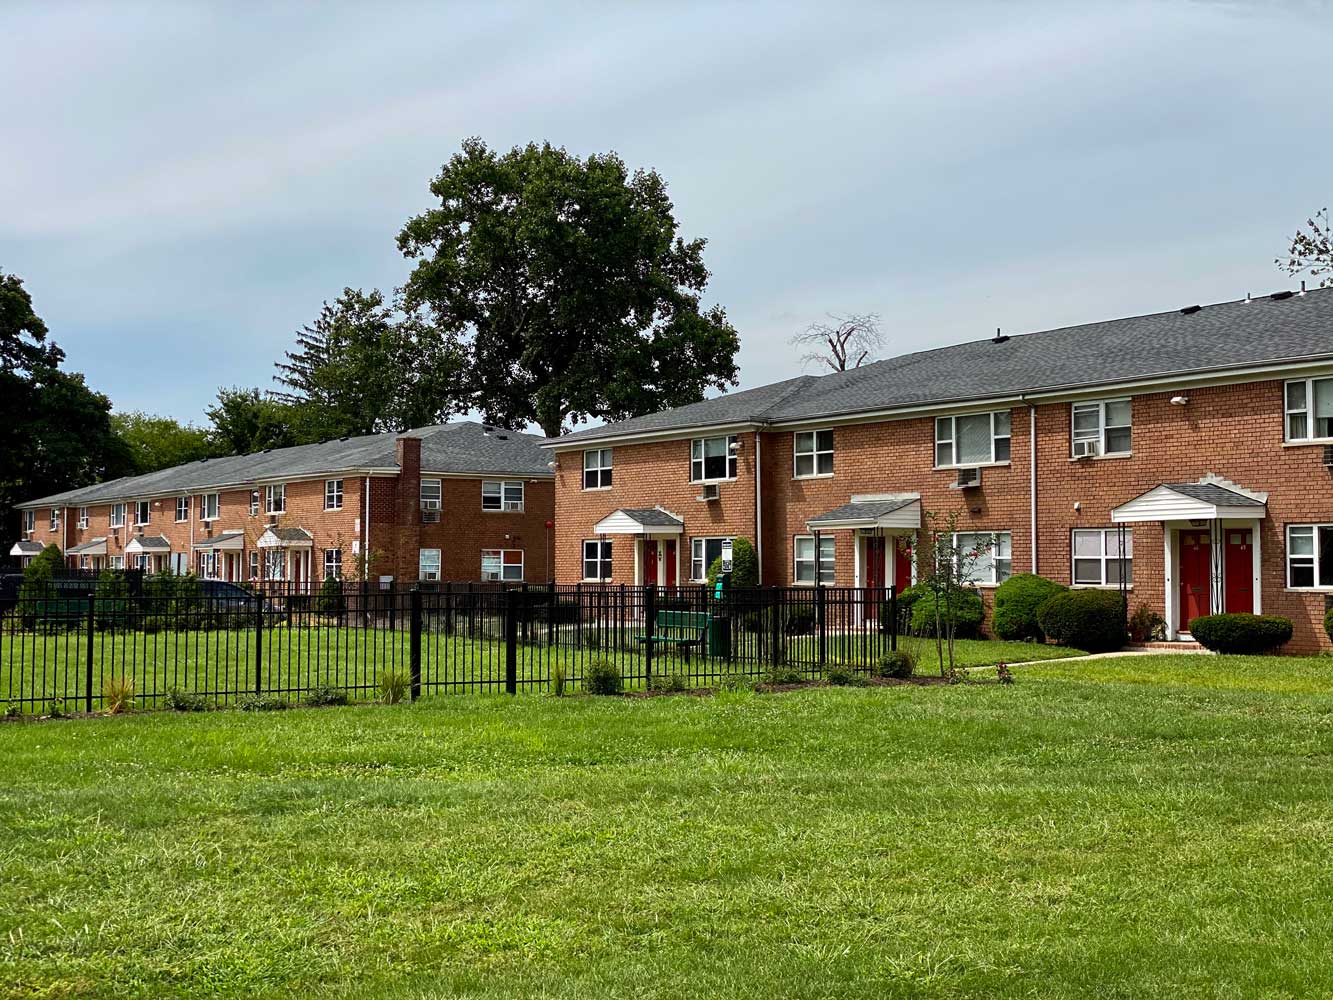  Lush Landscaping at Hampton Gardens Apartments in Middlesex, New Jersey